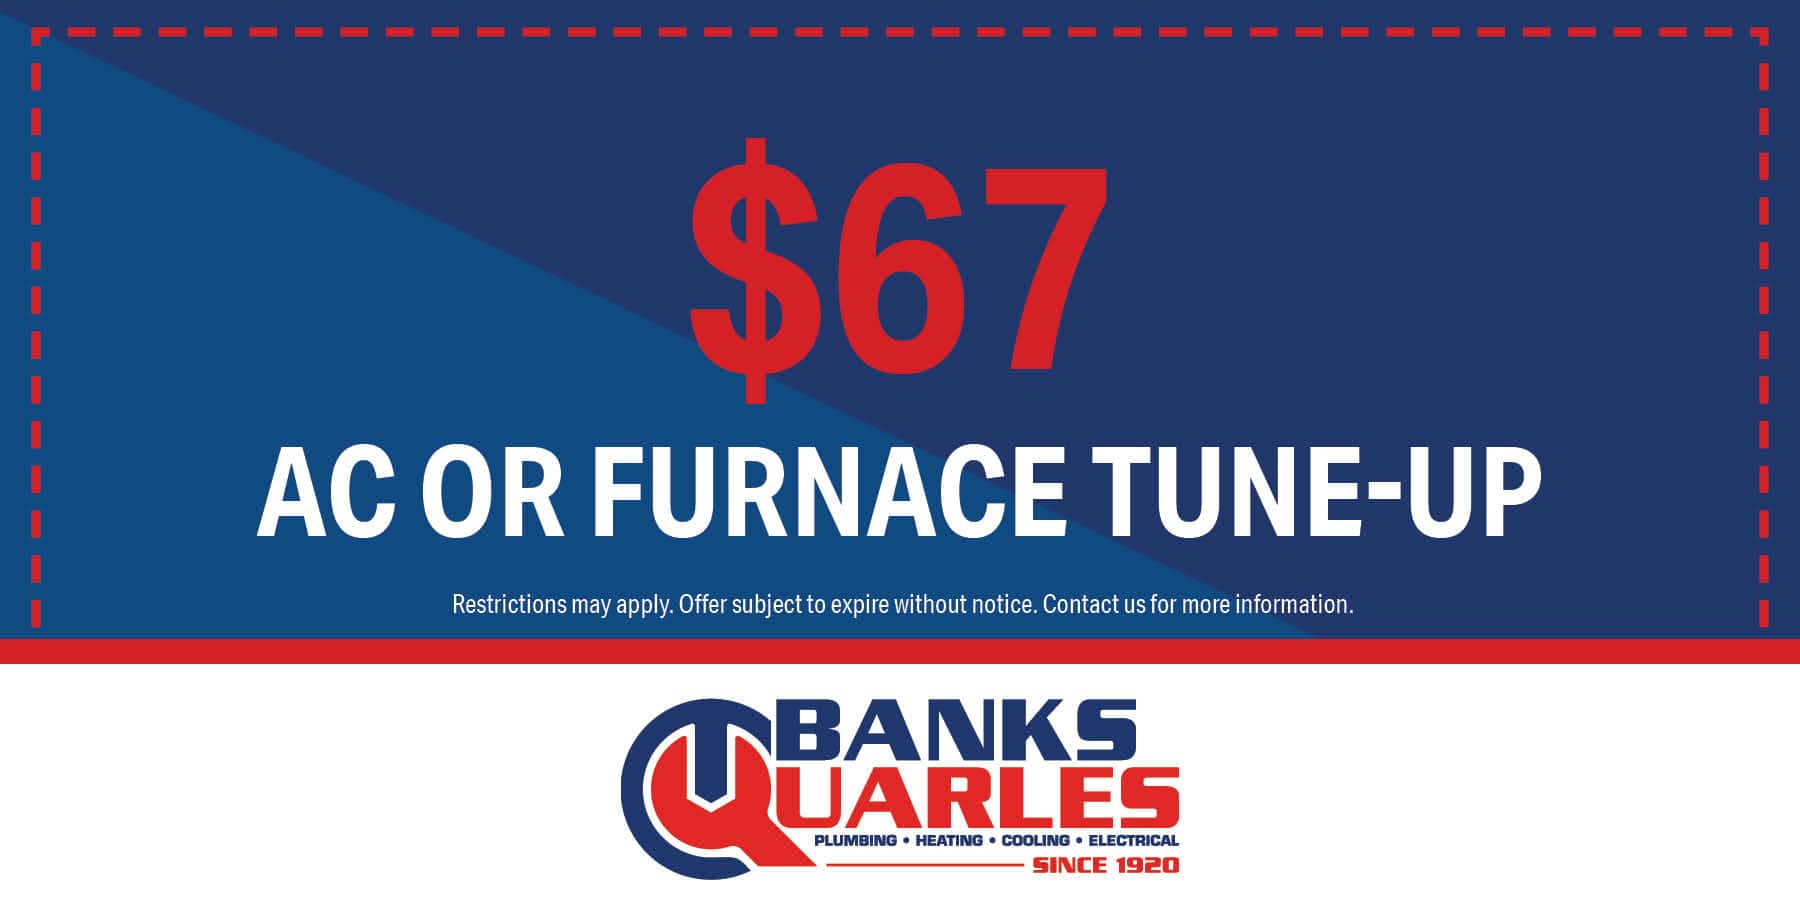  AC or furnace tune-up. Offer subject to expire without warning. Contact us for details.